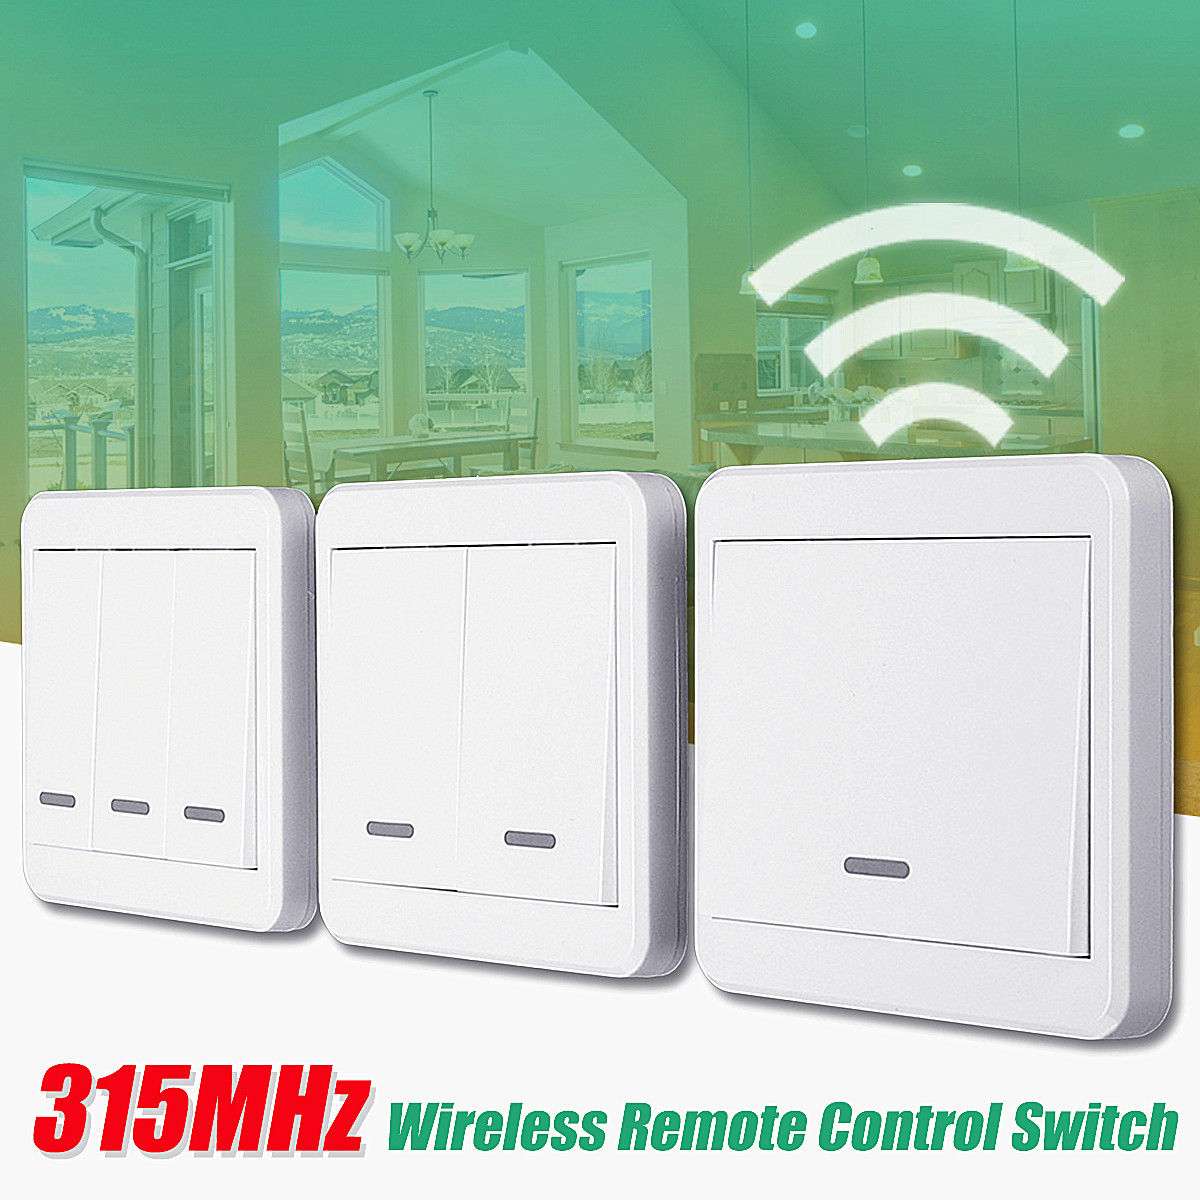 123-Way-Push-Button-Switch-Remote-Control-Switch-86-Wall-Panel-315MHz-Wireless-1334553-2